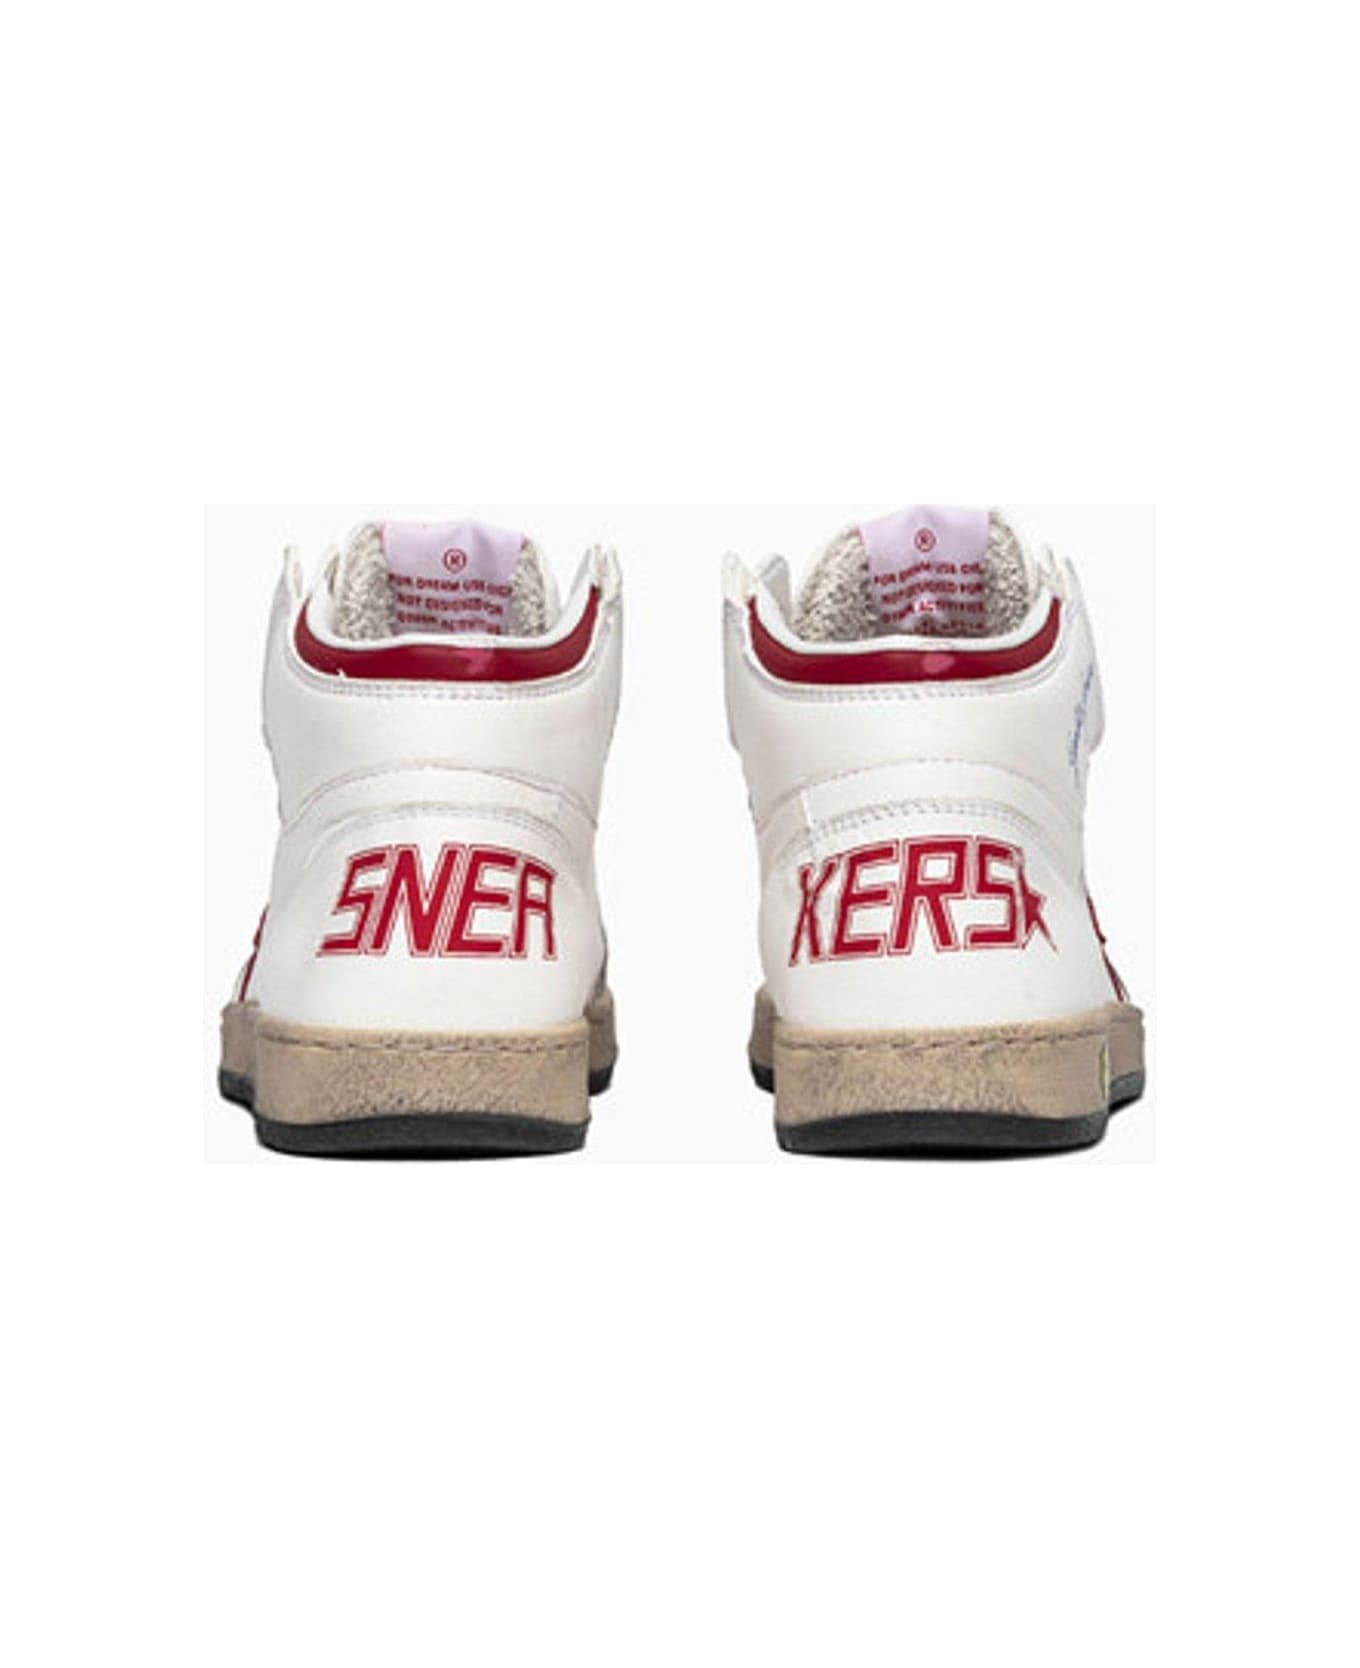 Golden Goose Logo Detailed Lace-up Sneakers - White/red